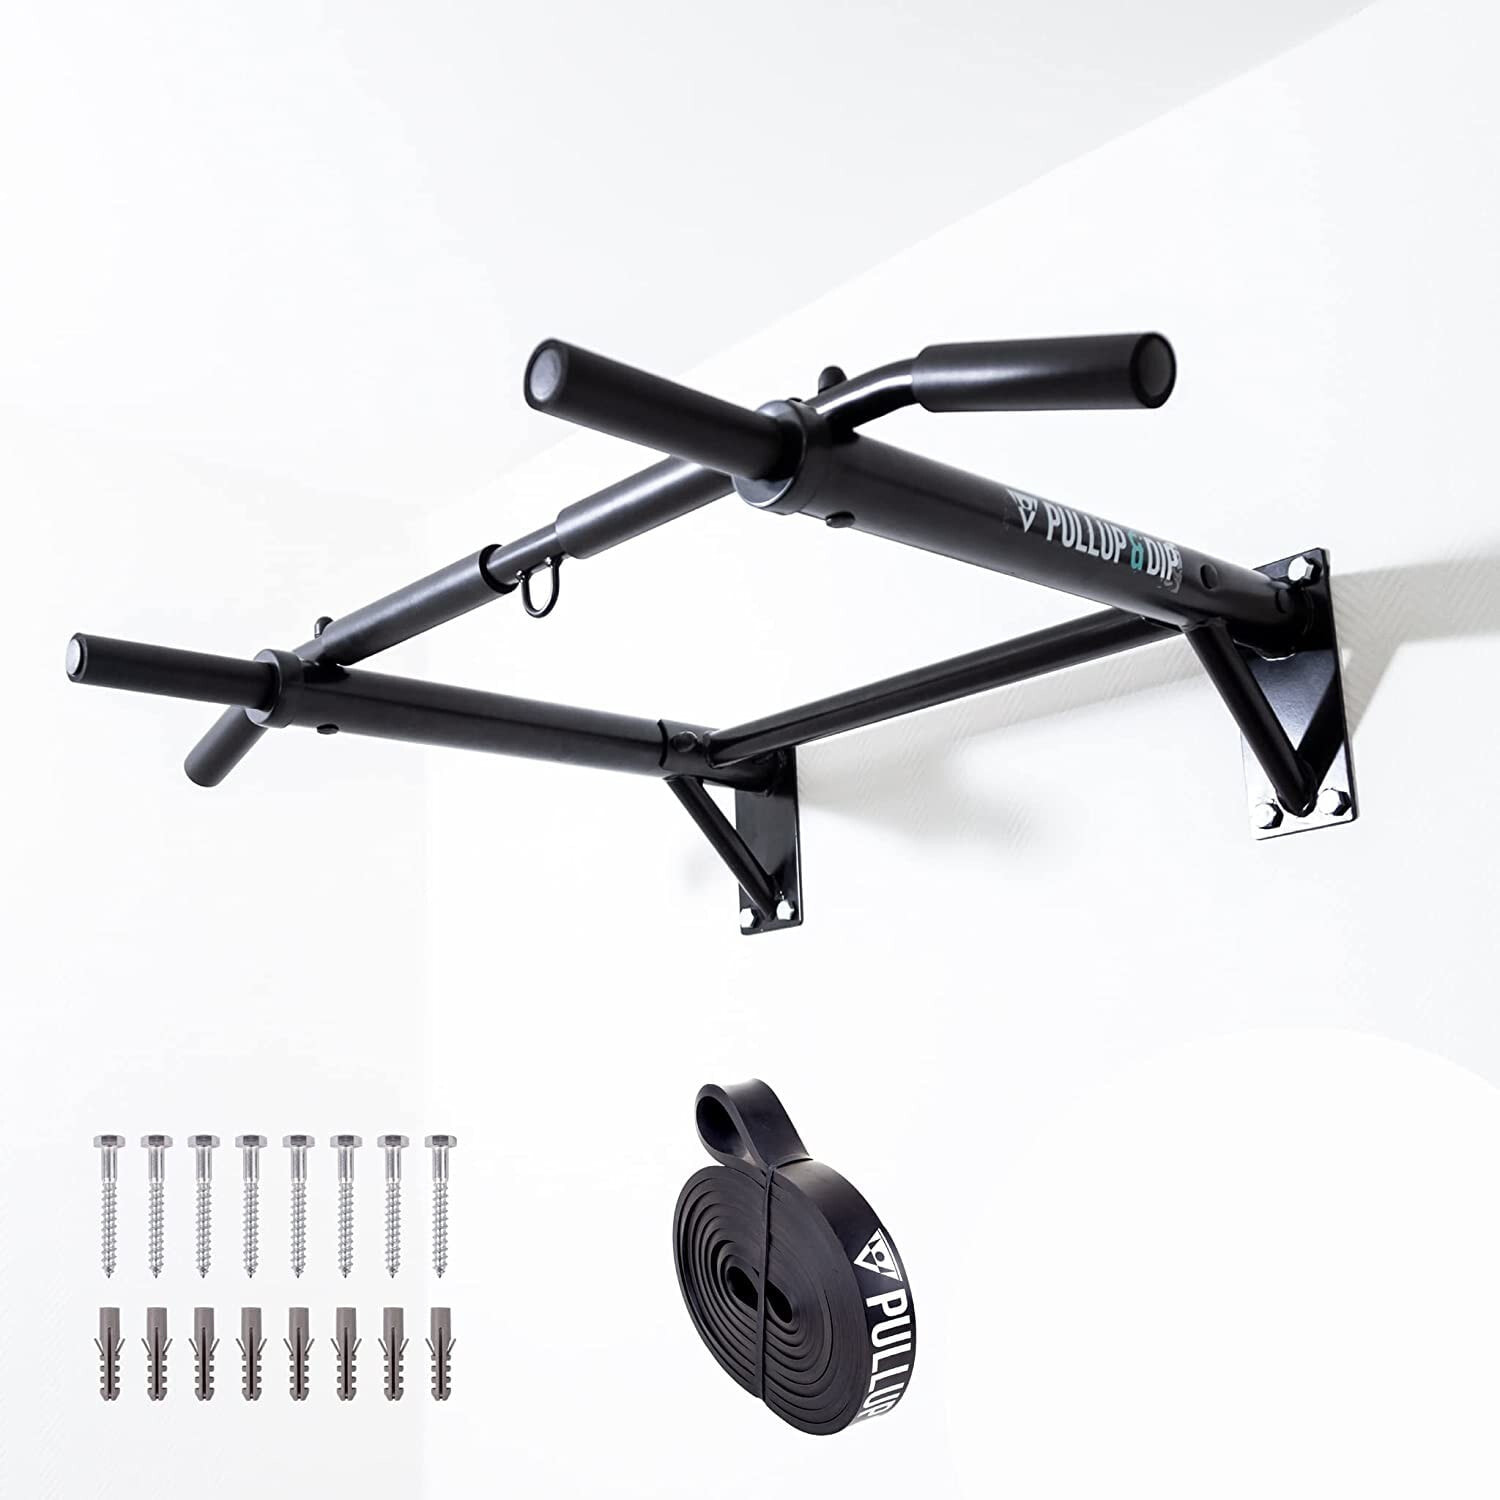 PULLUP & DIP pull-up bar, wall, professional multi-grip pull-up bar for wall mounting incl. Screws, pull-up strap and eBook, up to 200 kg